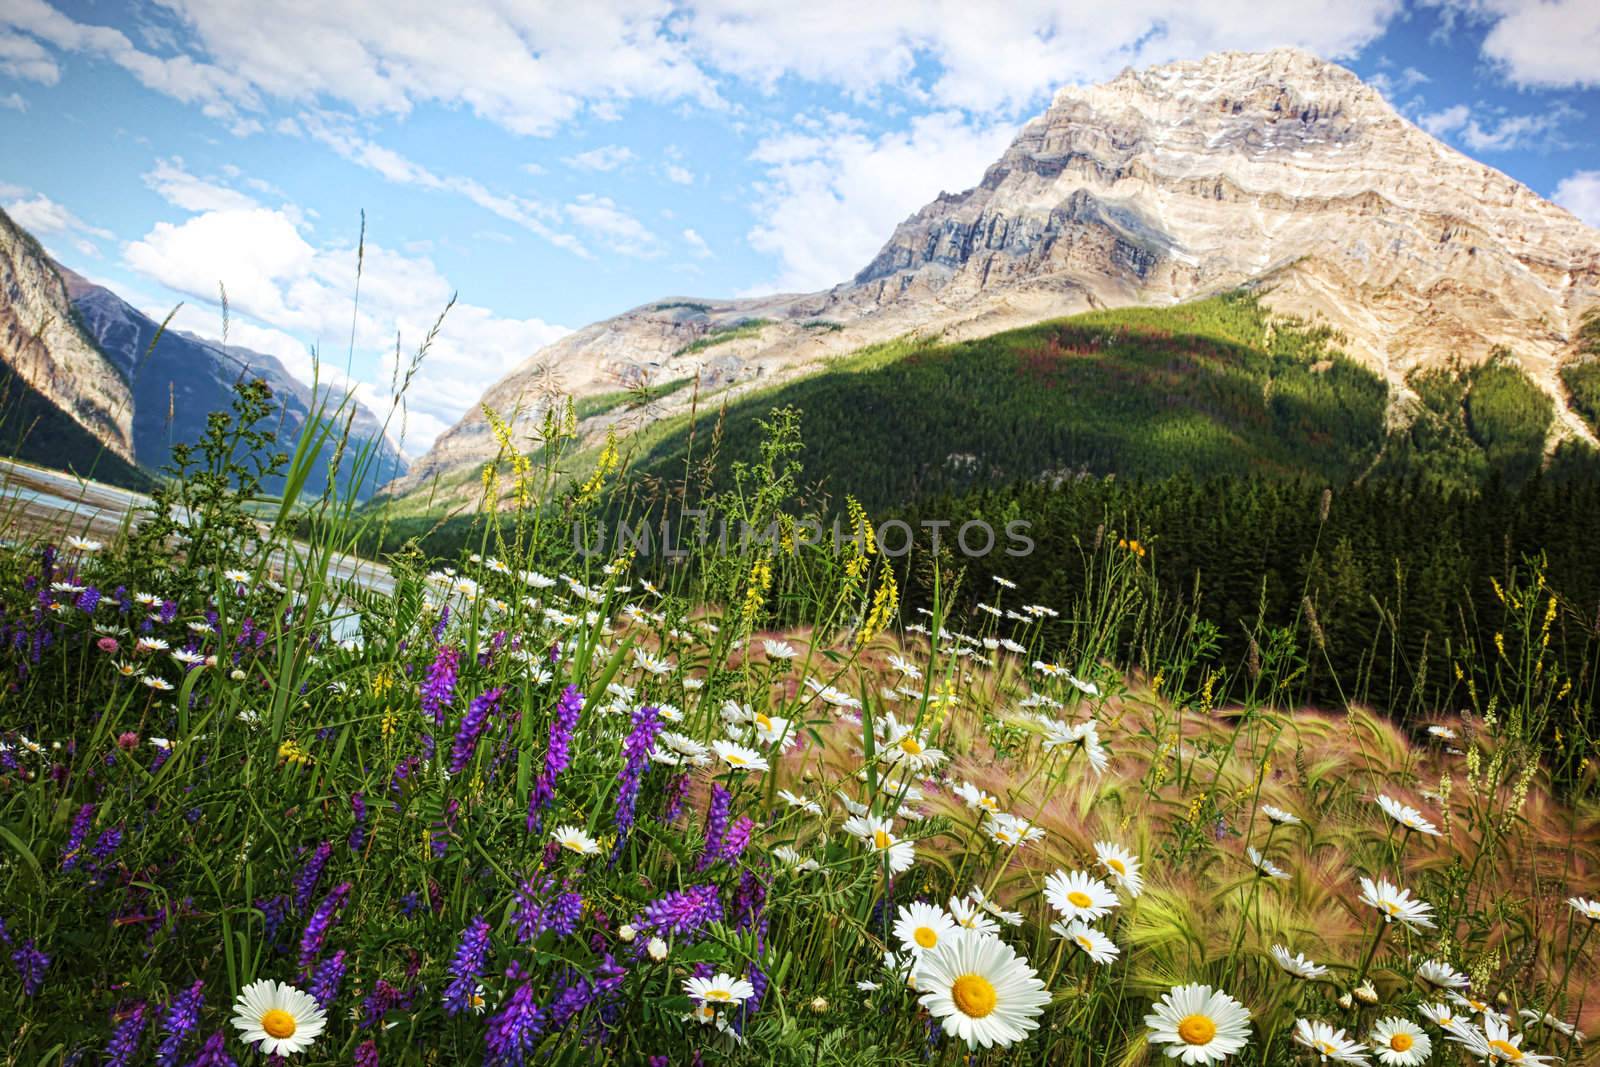 Field of daisies and wild flowers by Sandralise